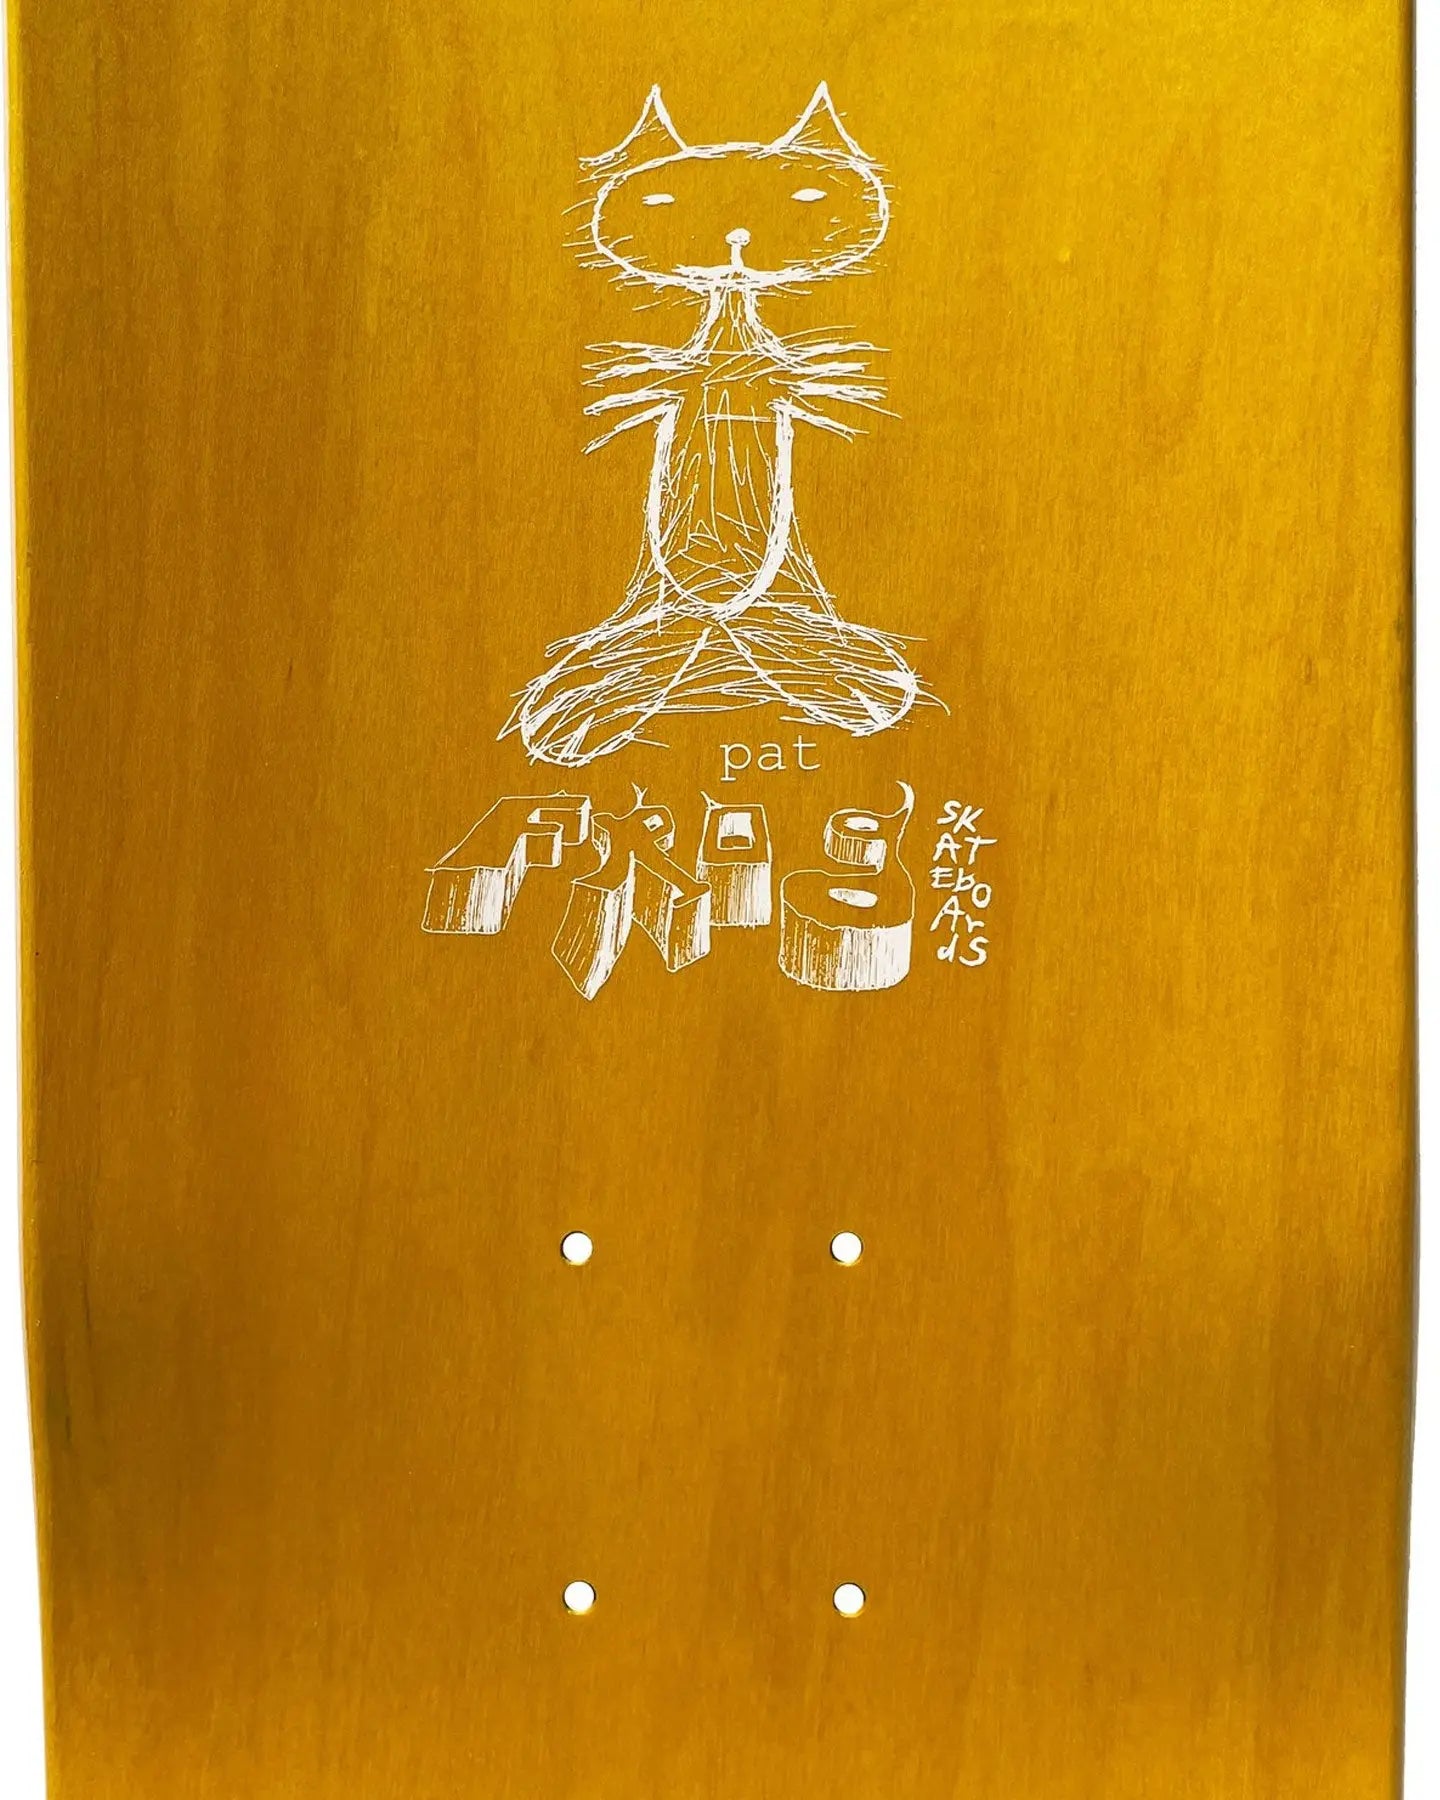 Frog Iconic Deck - Pat G / 8.25" Boards